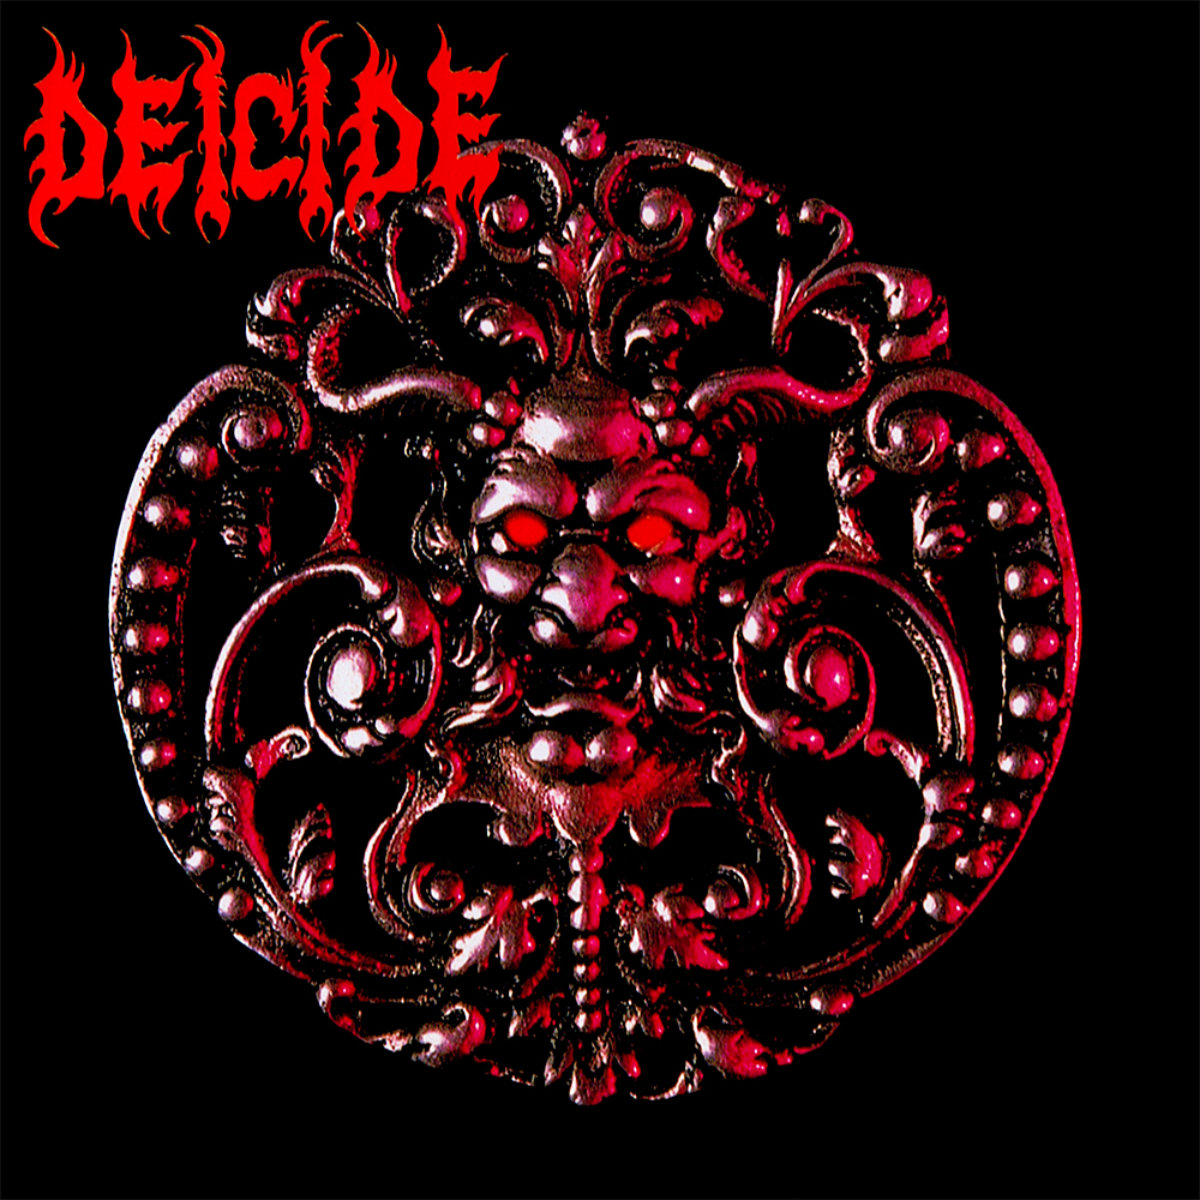 Deicide Wallpapers